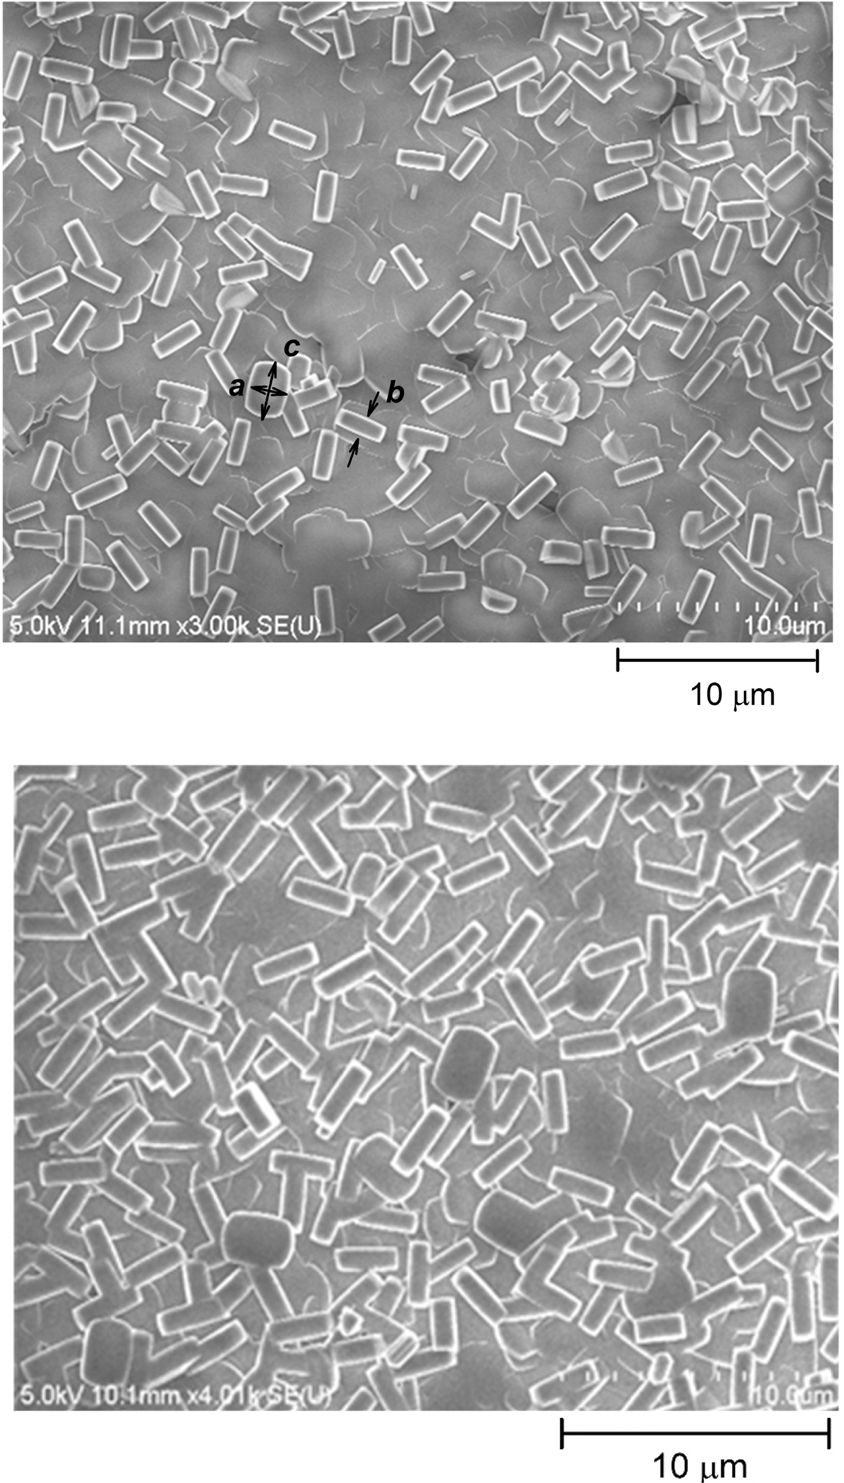 Heat Treatment Dependent Cytotoxicity Of Silicalite 1 Films Deposited On Ti 6al 4v Alloy Evaluated By Bone Derived Cells Scientific Reports